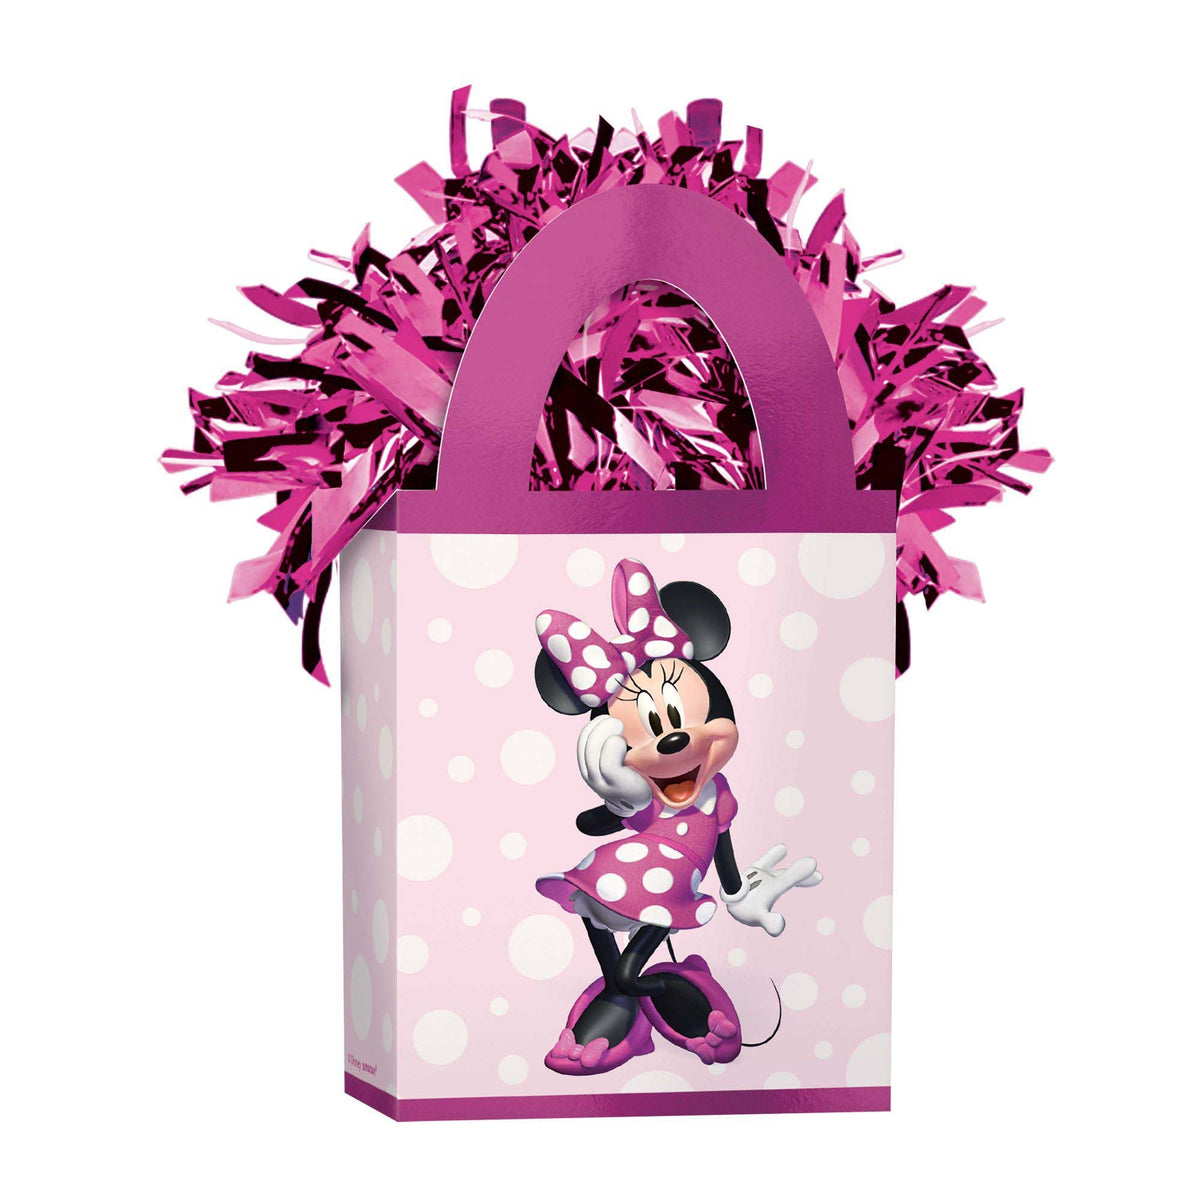 AMSCAN CA Balloons Minnie Mouse Forever Balloon Weight, 1 Count